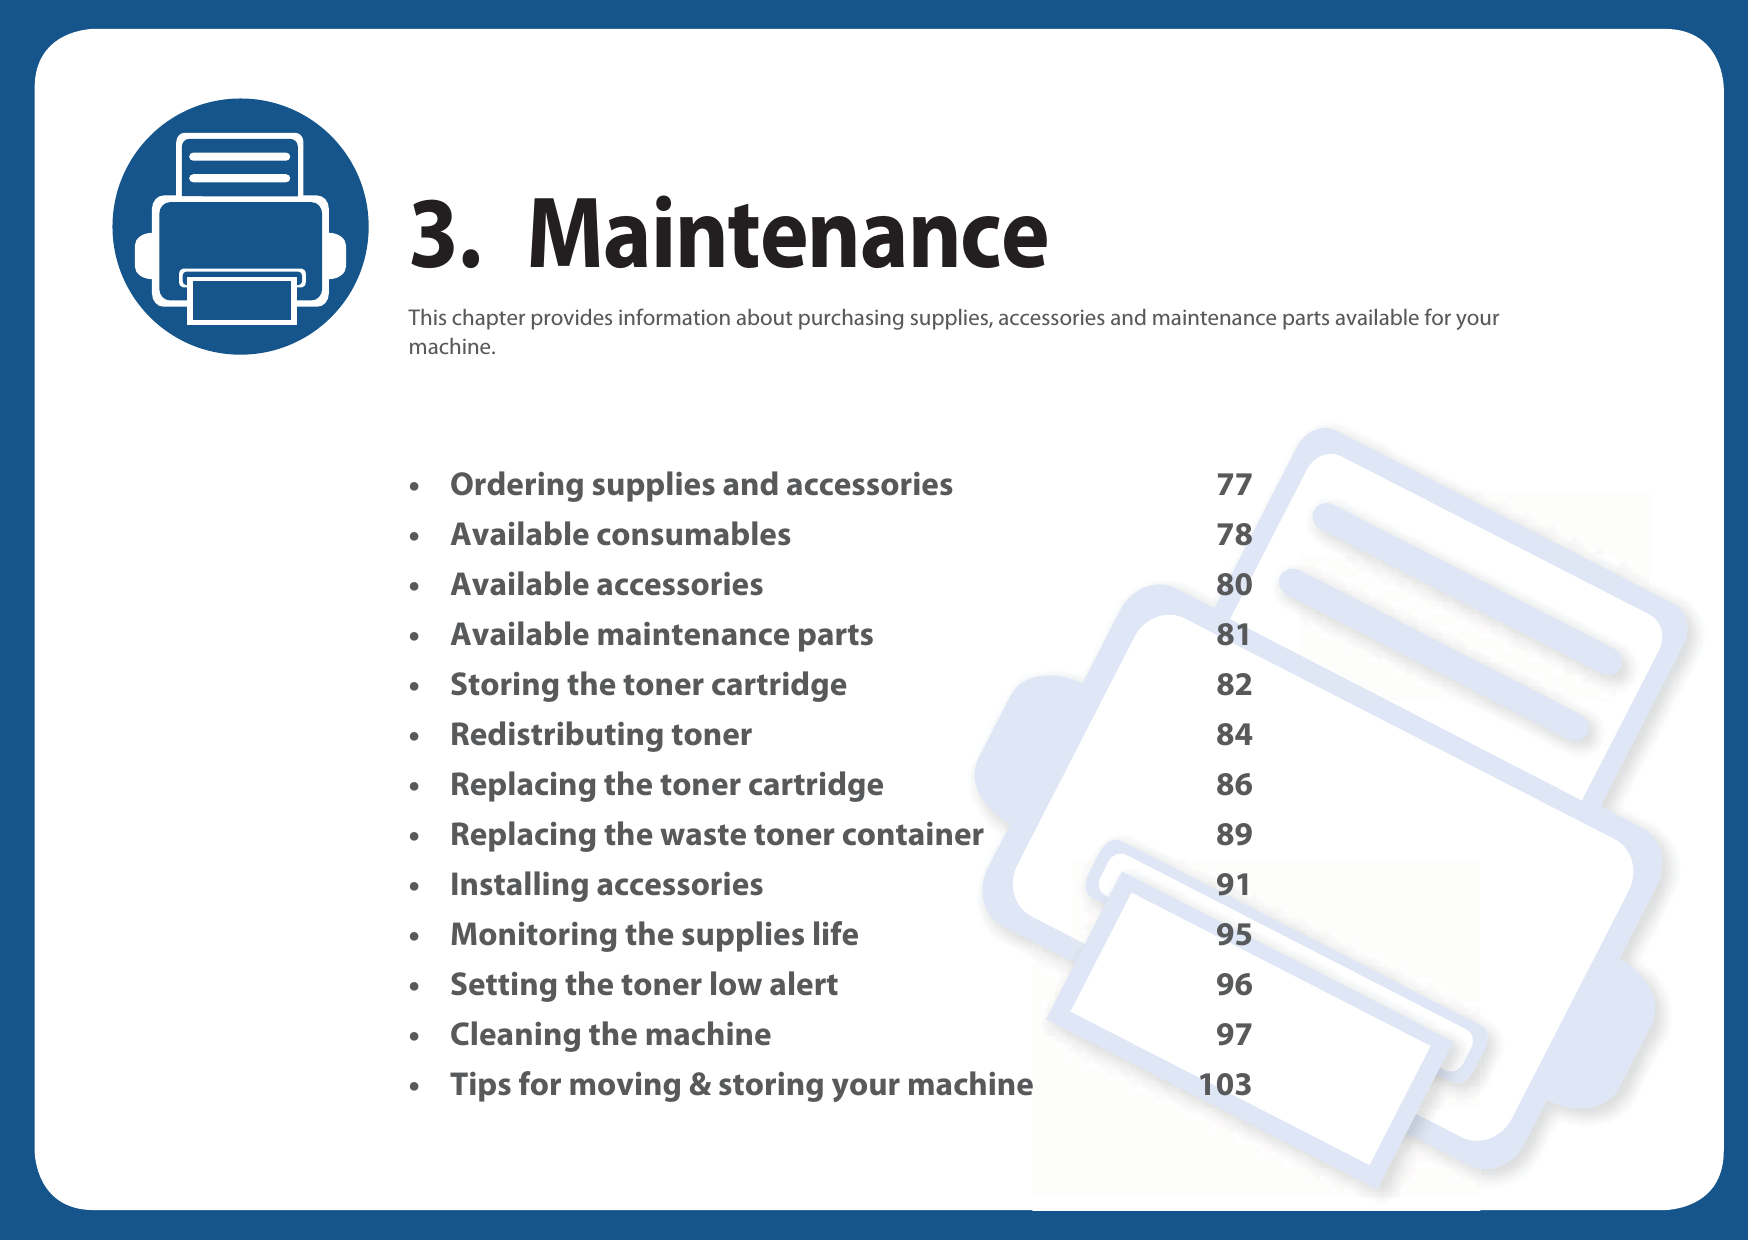 3. MaintenanceThis chapter provides information about purchasing supplies, accessories and maintenance parts available for your machine.• Ordering supplies and accessories 77• Available consumables 78• Available accessories 80• Available maintenance parts 81• Storing the toner cartridge 82• Redistributing toner 84• Replacing the toner cartridge 86• Replacing the waste toner container 89• Installing accessories 91• Monitoring the supplies life 95• Setting the toner low alert 96• Cleaning the machine 97• Tips for moving &amp; storing your machine 103